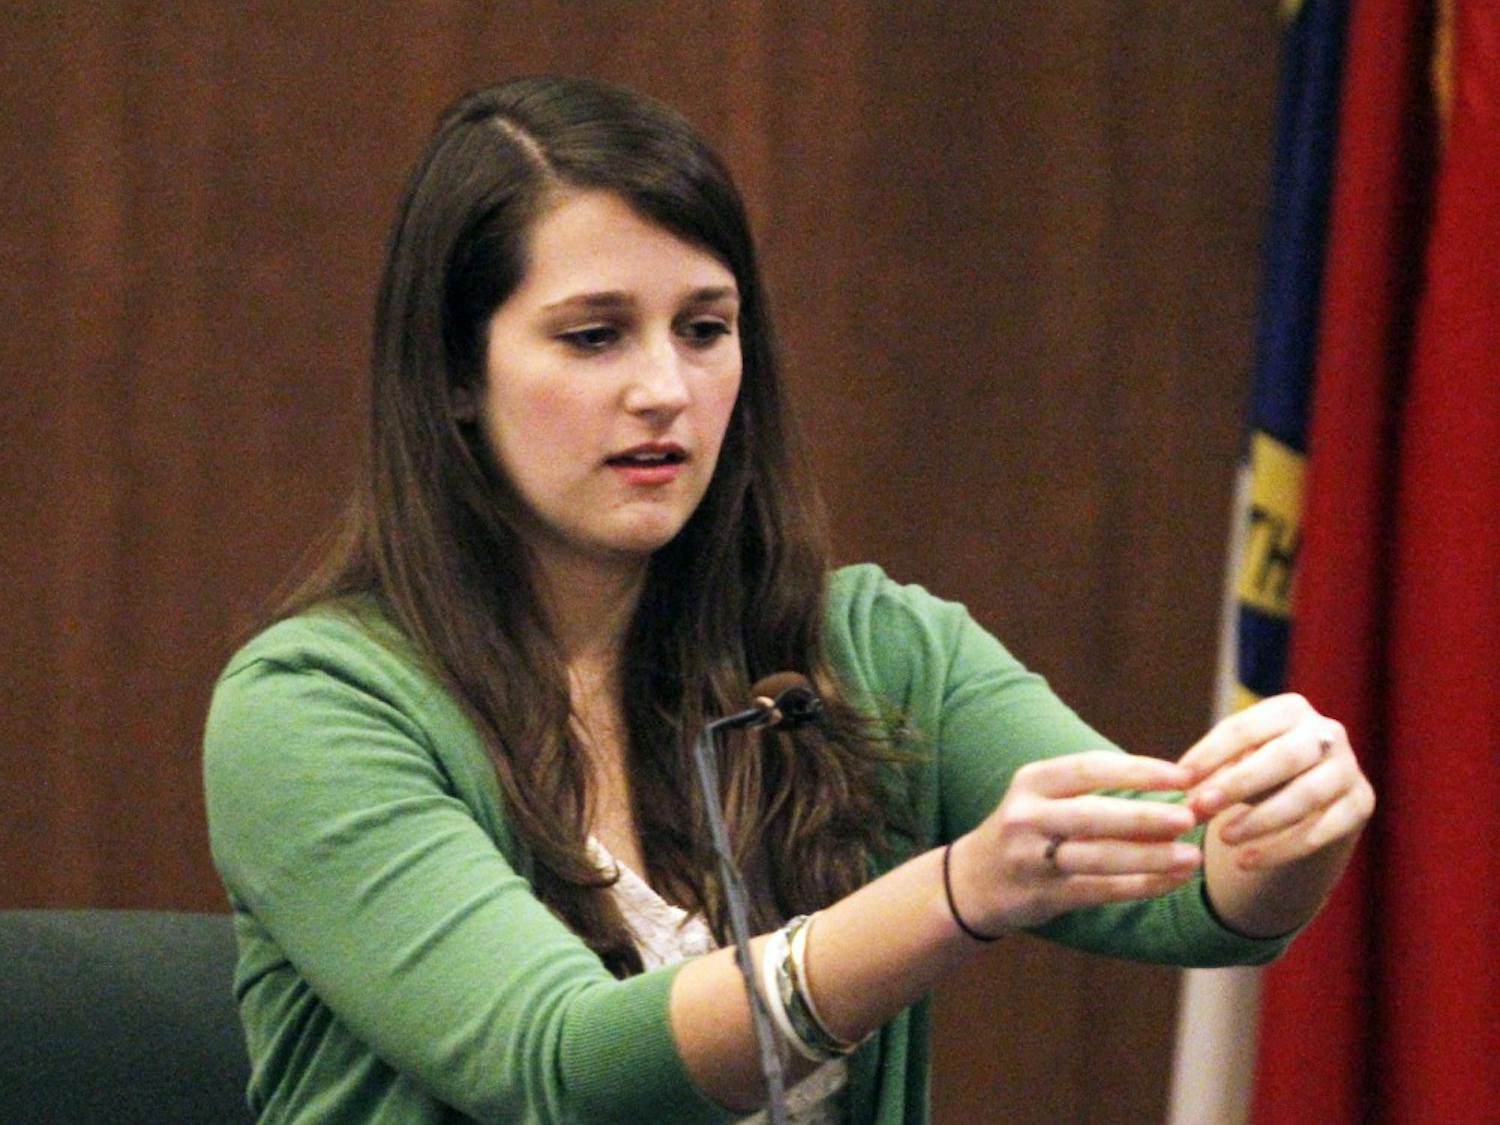 Former UNC student Caroline Harper describes where her car was parked near a dumpster outside of her UNC sorority early the morning of March 5, 2008 where she saw two young African-American males nearby. Harper was the second witness in the second day of testimony Thursday, Dec. 8, 2011 in the Battle Courtroom, Hillsborough, NC. The jury was allowed to hear her after the defense contended that her testimony would be prejudicial. Judge Allen Baddour allowed Harper's statements before the Lovette jury. 